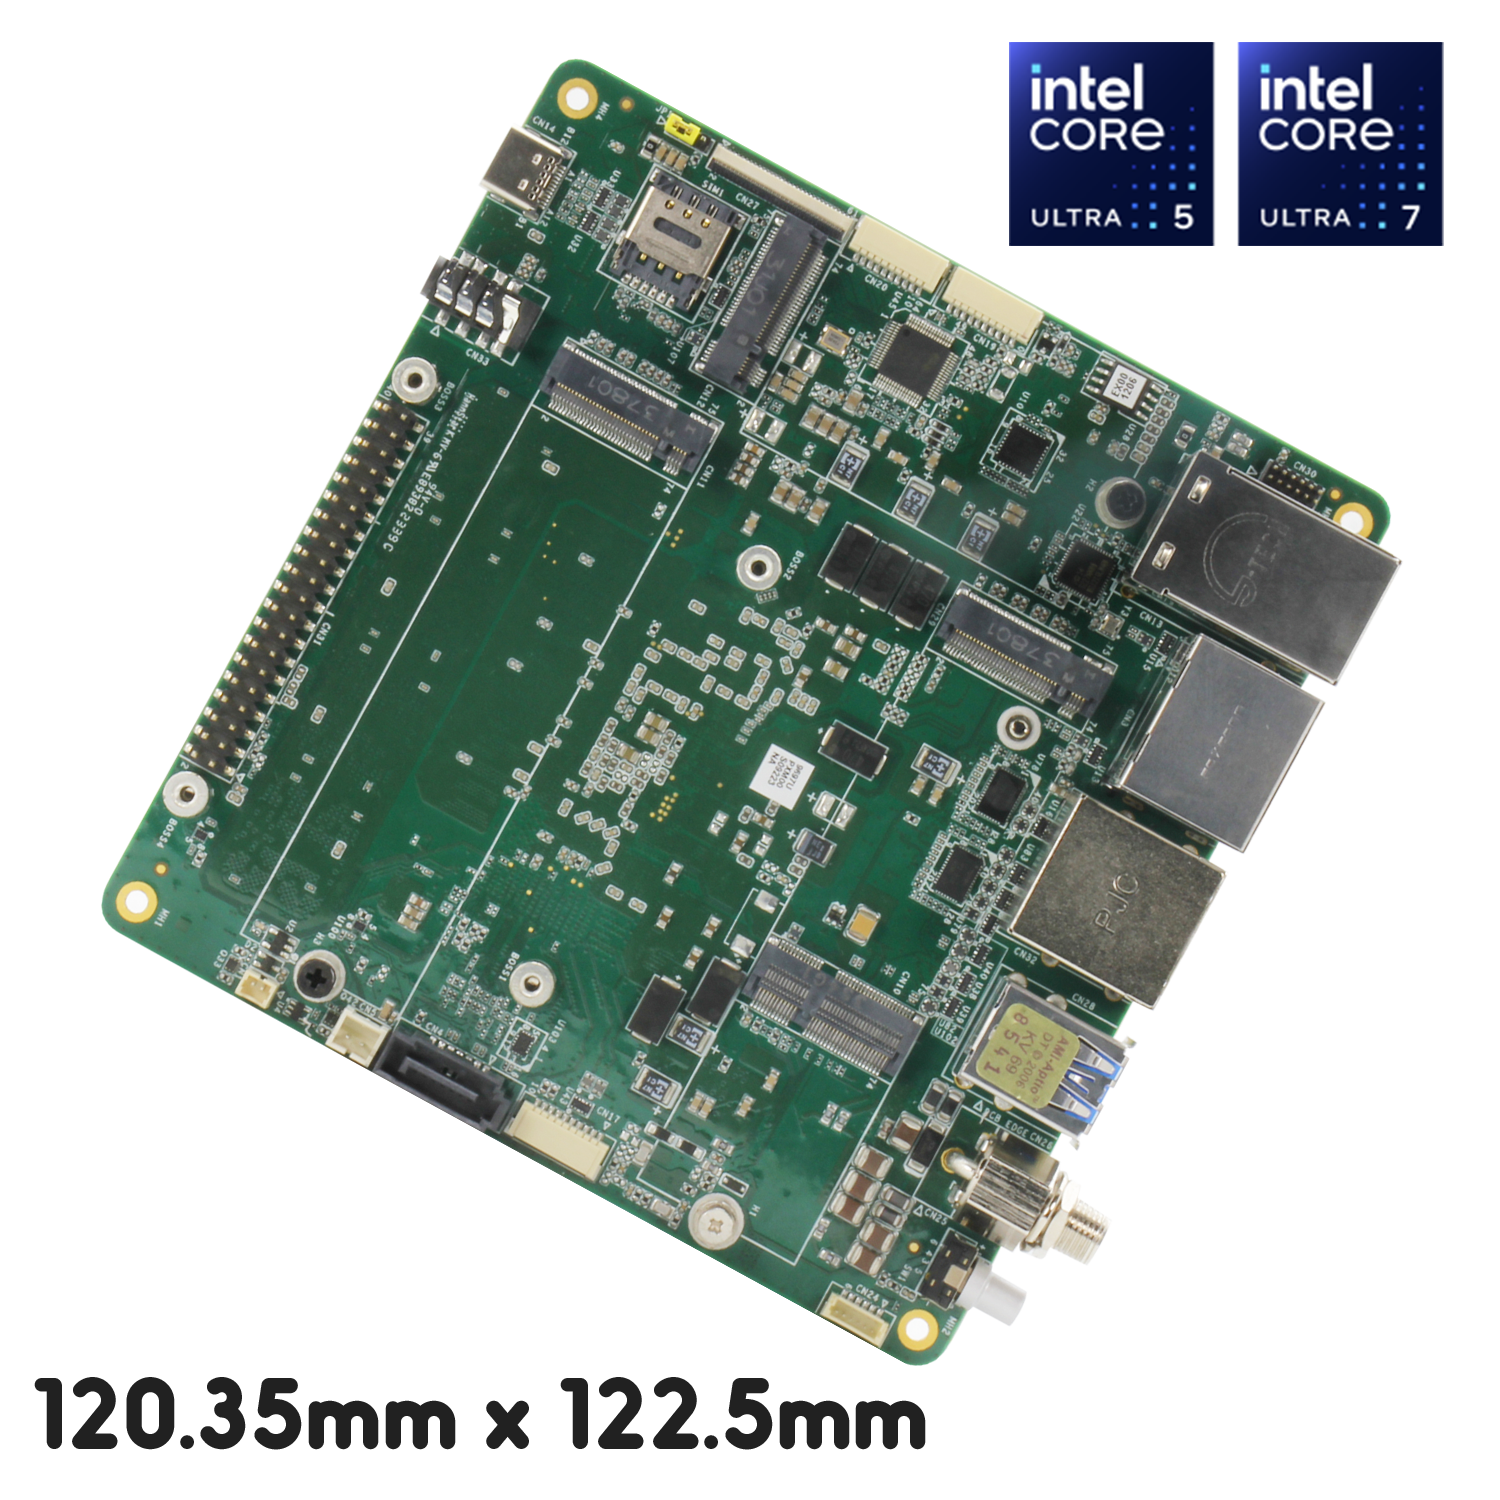 Product photo of UP Xtreme i14, embedded board, front view